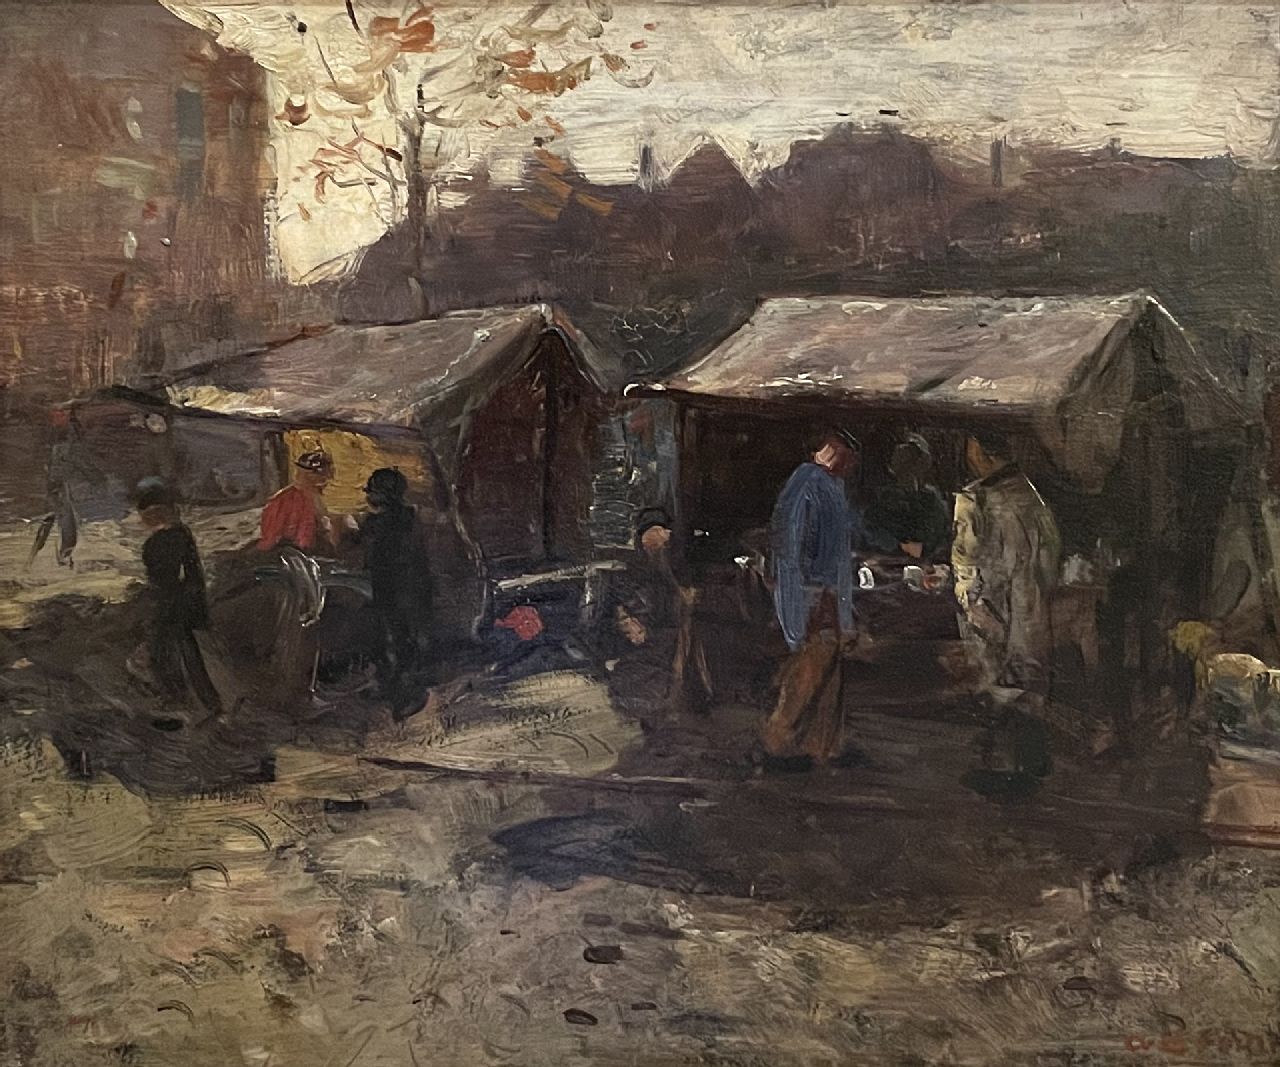 Boom K.A.A.J.  | Karel Alexander August Jan 'Alex' Boom Boom | Paintings offered for sale | Market stalls in a town, oil on panel 29.5 x 34.3 cm, signed l.r.